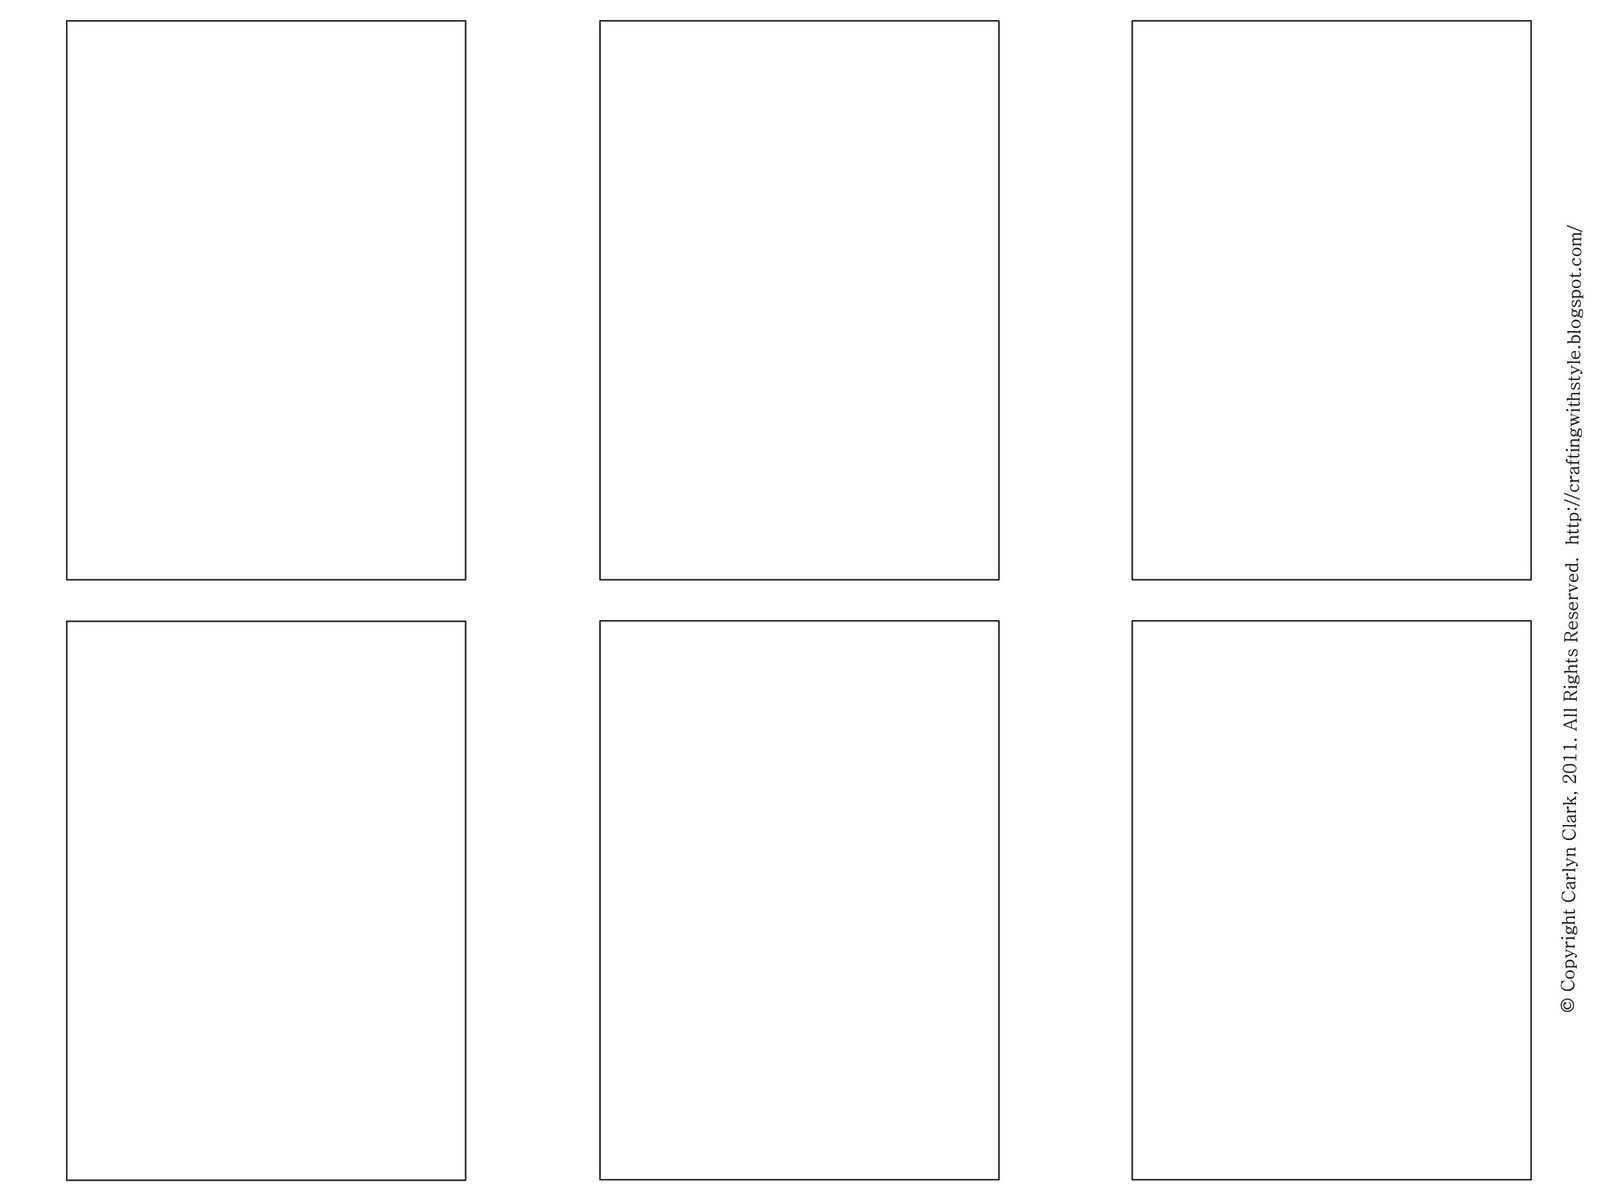 30 Free Trading Card Template Download | Simple Template Design Within Trading Cards Templates Free Download